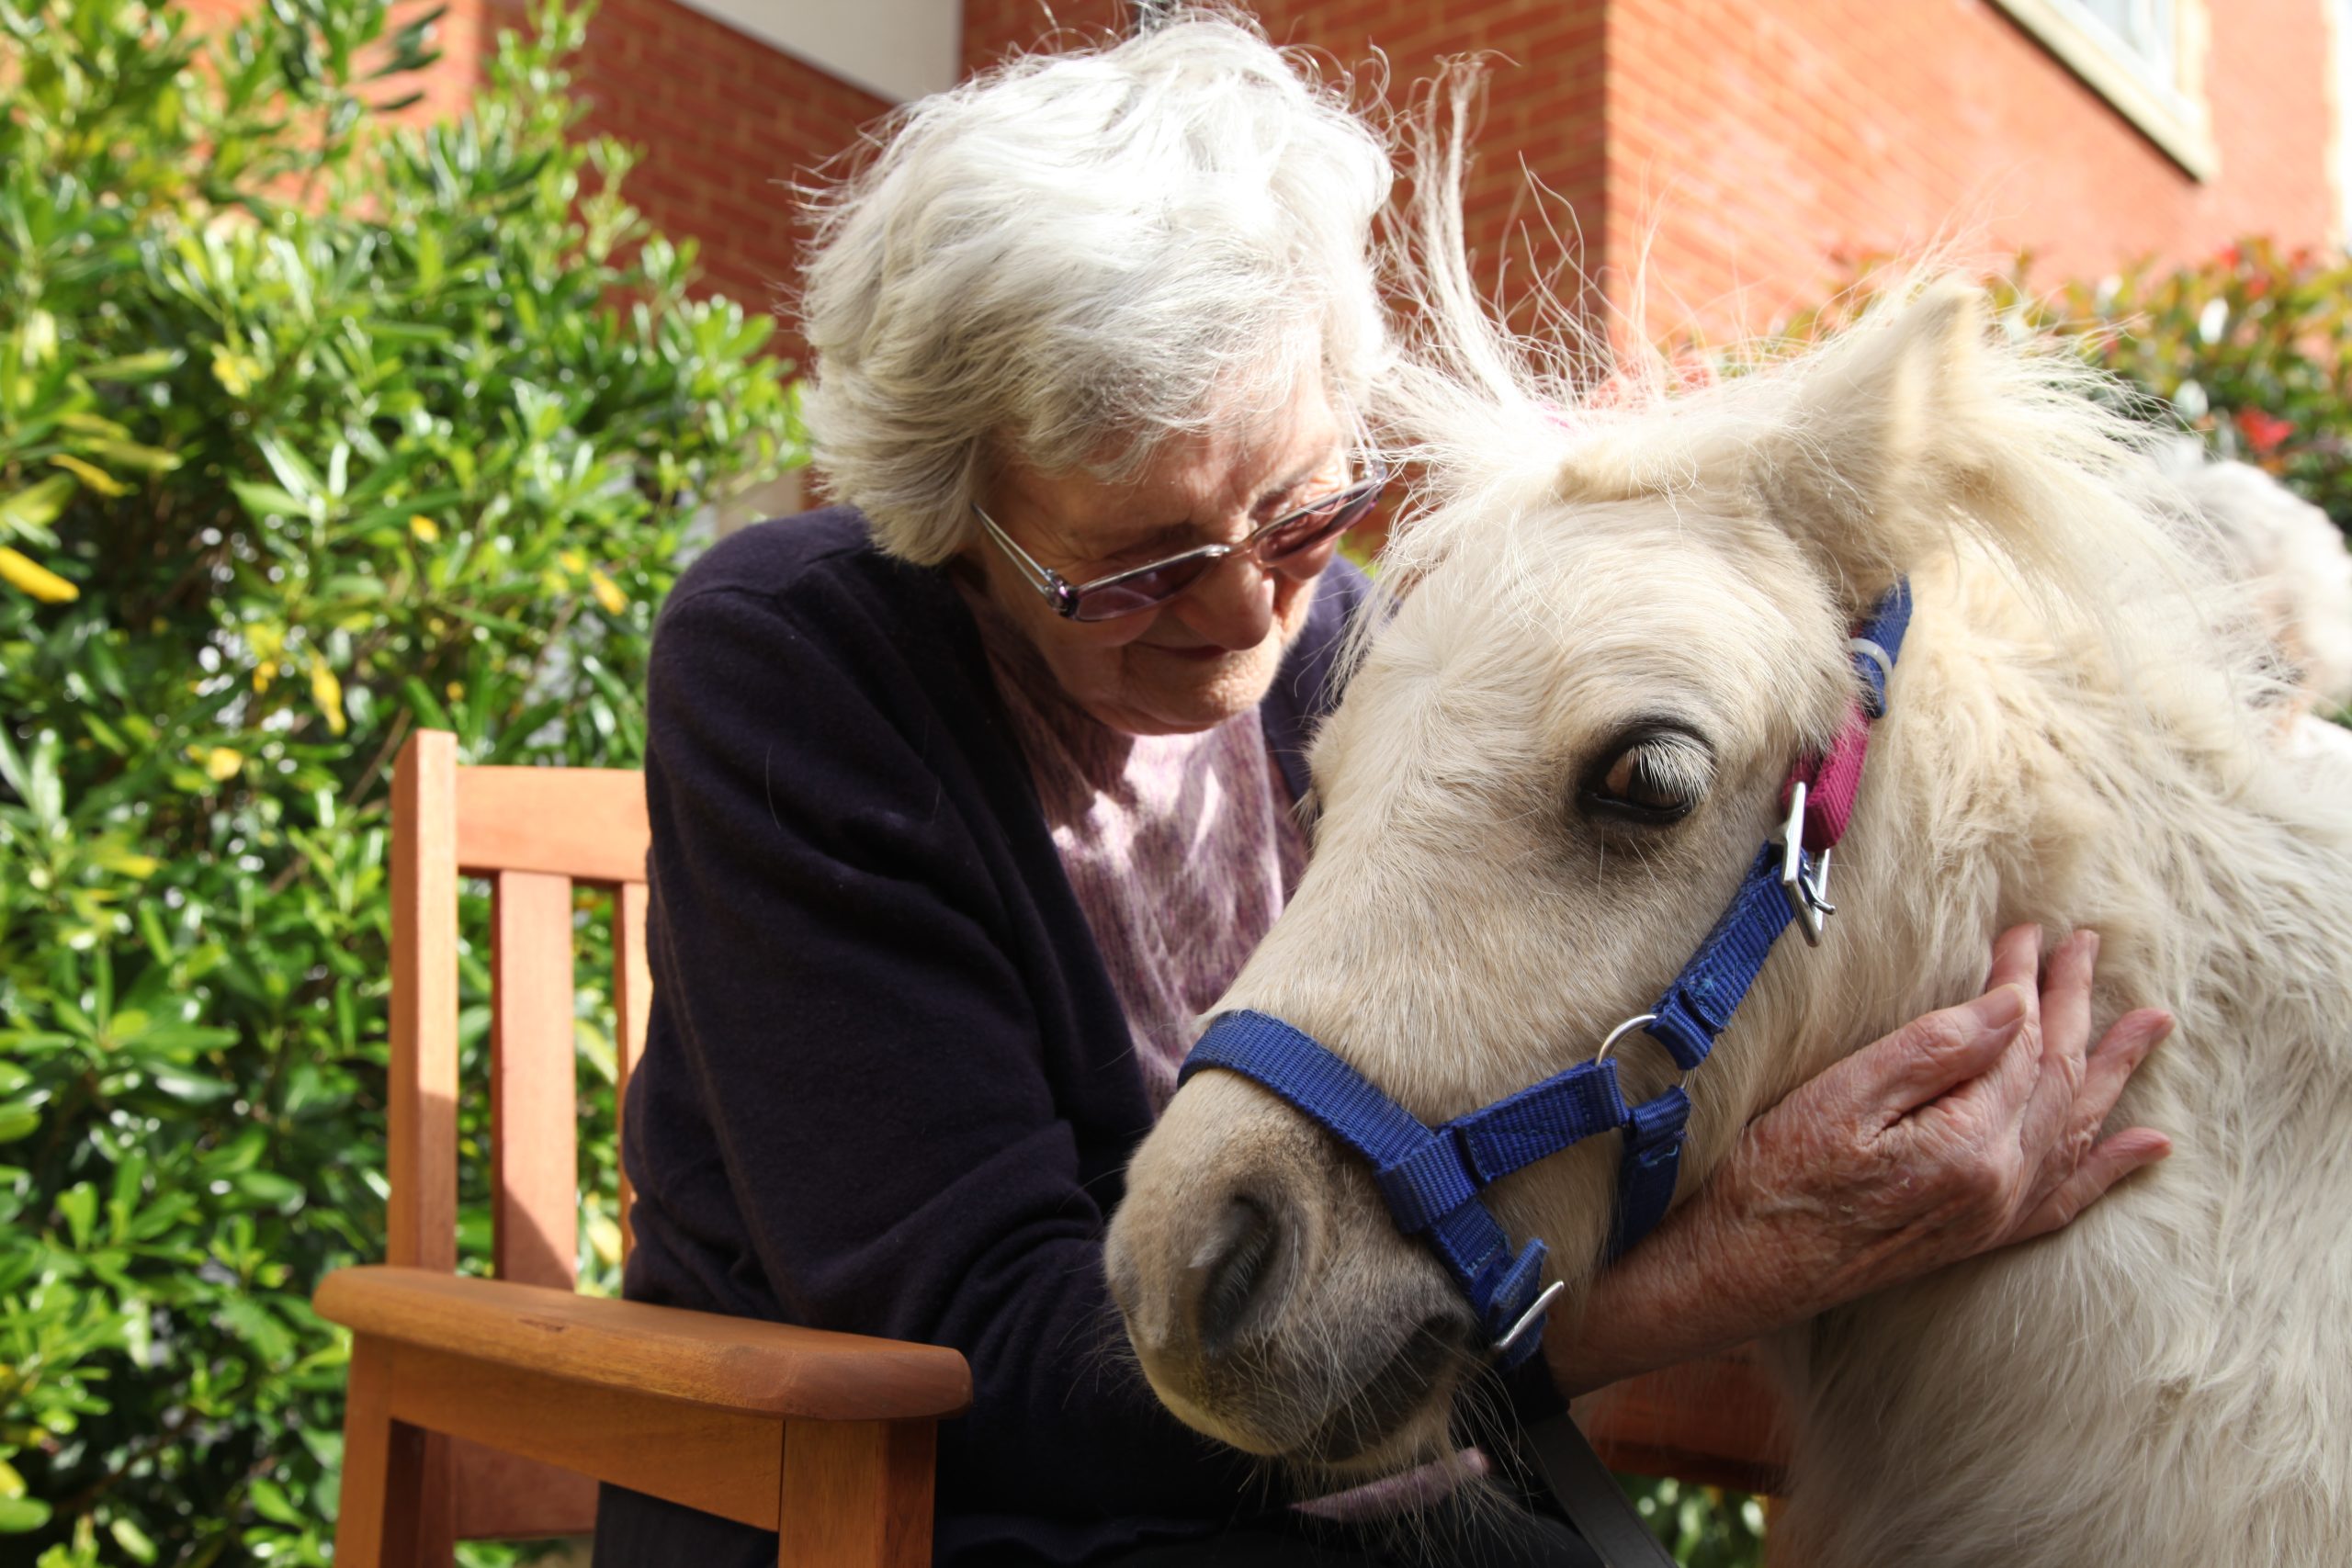 A care home resident interacts with a Shetland pony during a visit to an Encore Care Home